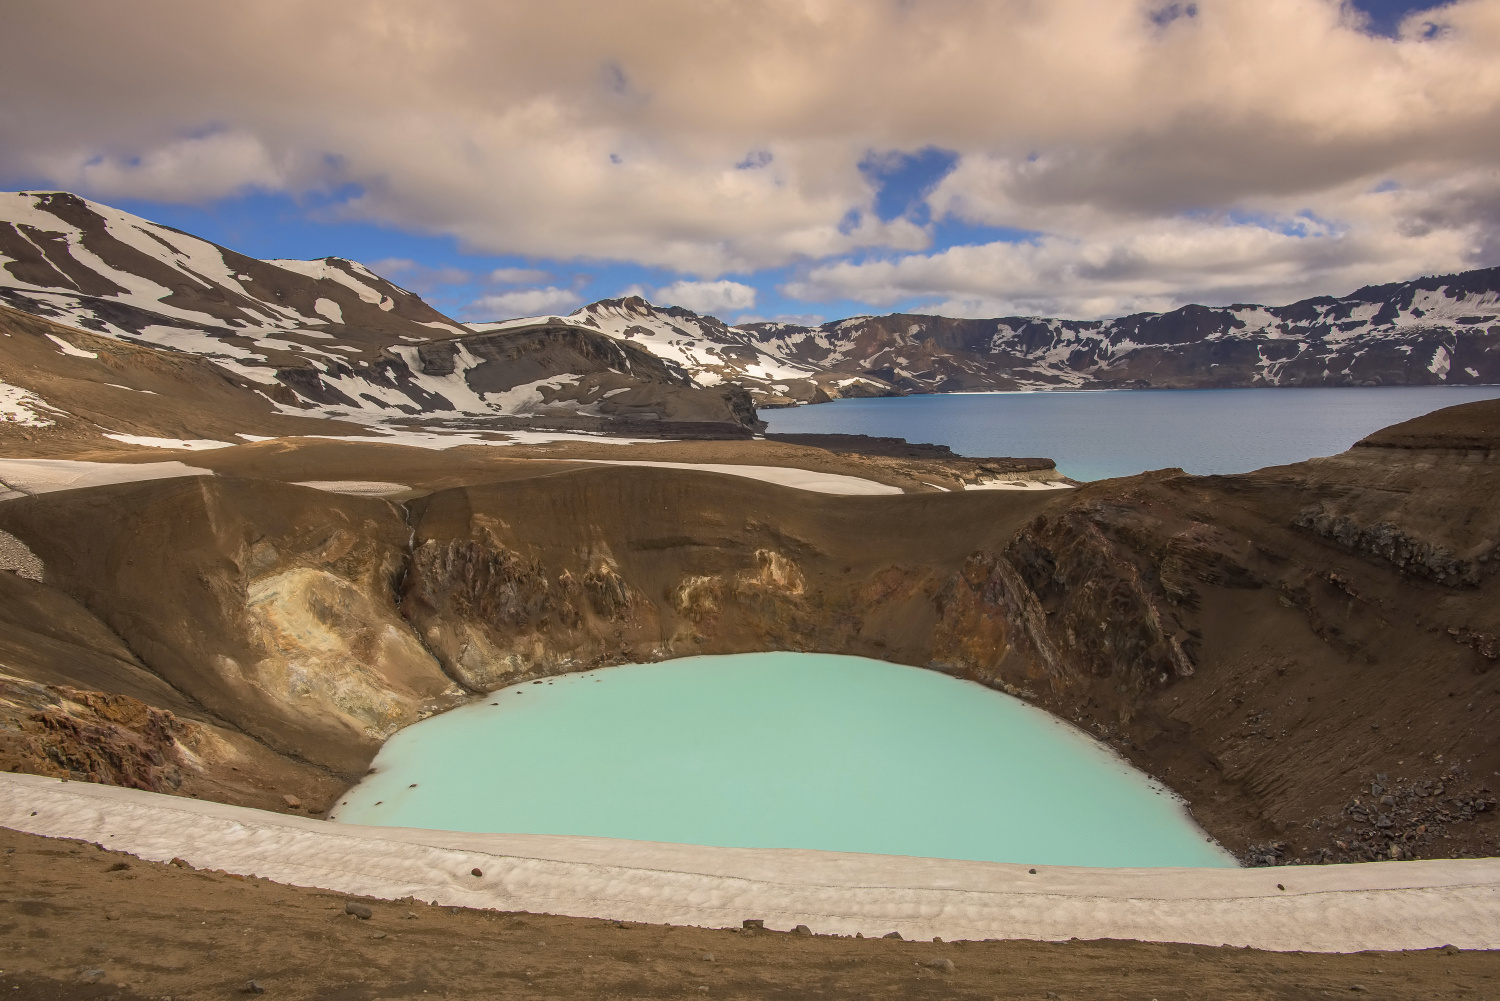 Askja is the volcanic crater in Iceland